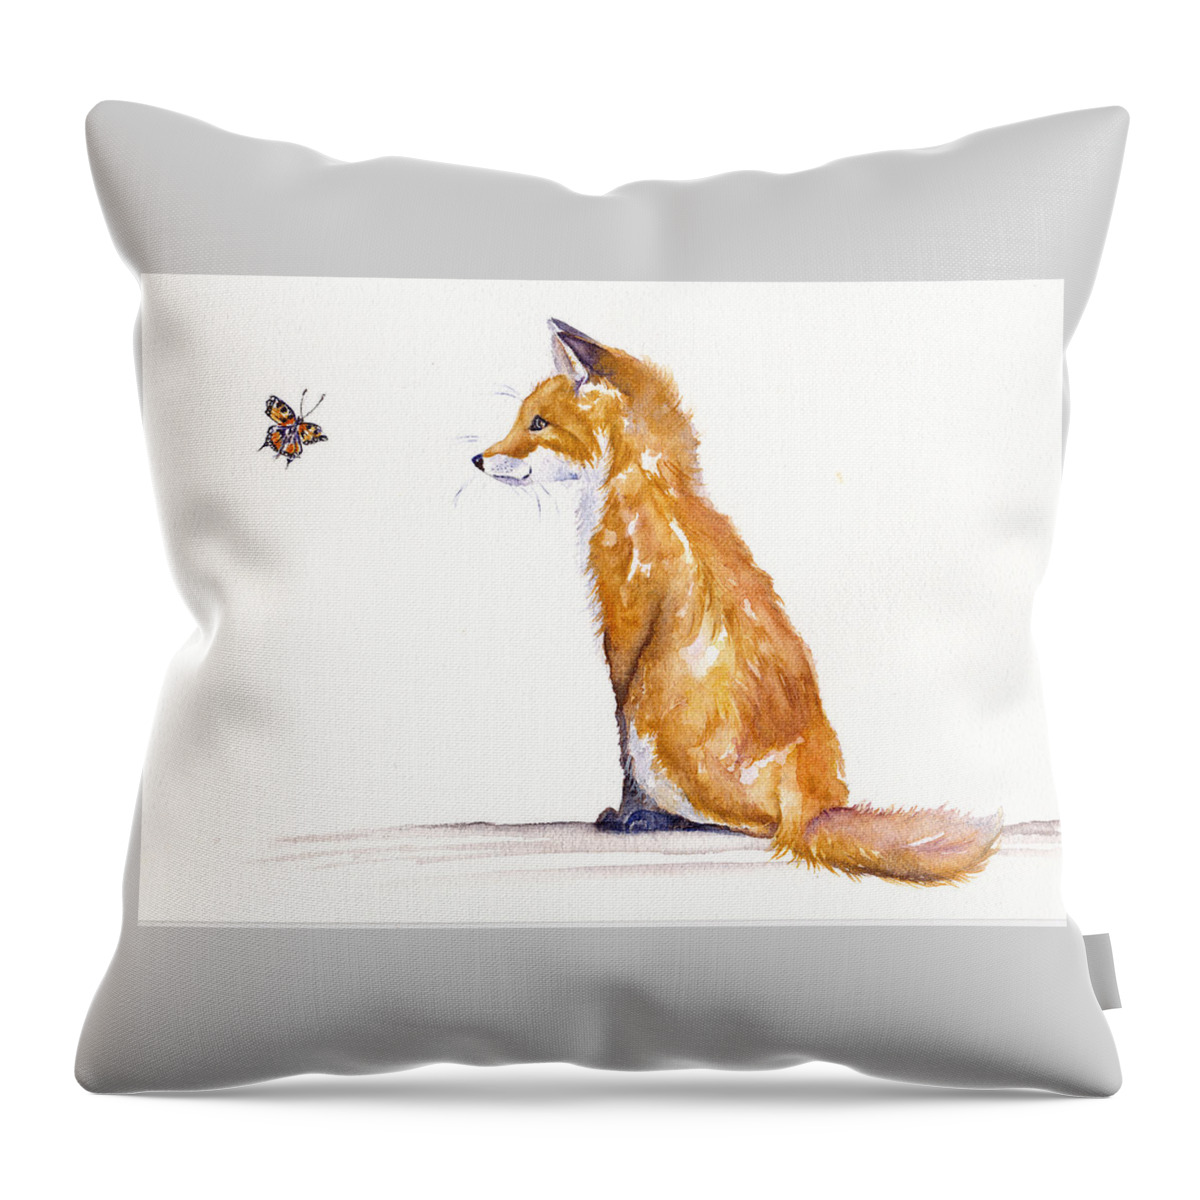 Fox Cub Throw Pillow featuring the painting The Curious Fox Cub by Debra Hall